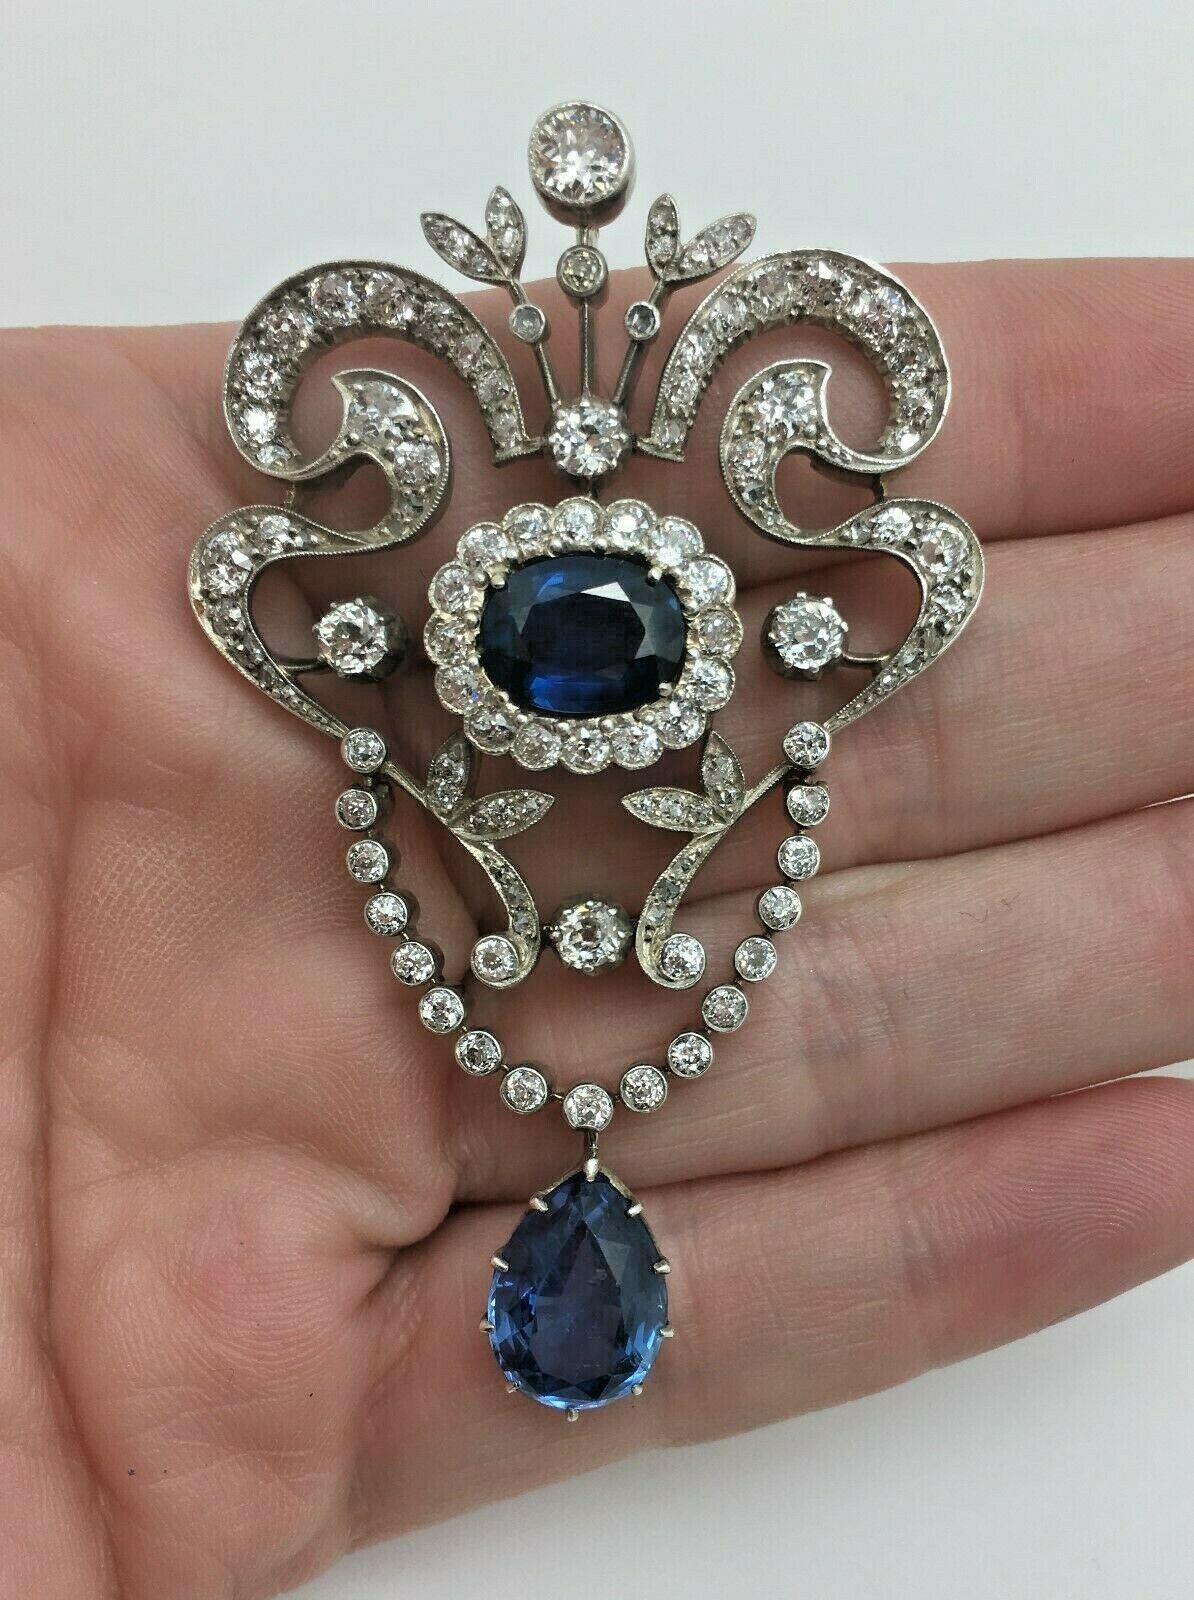 Estate Art Deco Platinum 12.86 Old European Cut Diamonds & Sapphire Brooch Pin

One Oval Shaped Natural Blue Sapphire, Measuring 10.28 x 7.86x 4.33mm, Weighing Approximately 4.00 Carat Total Weight.
Origin: Thailand

One Pear Shaped Natural Blue